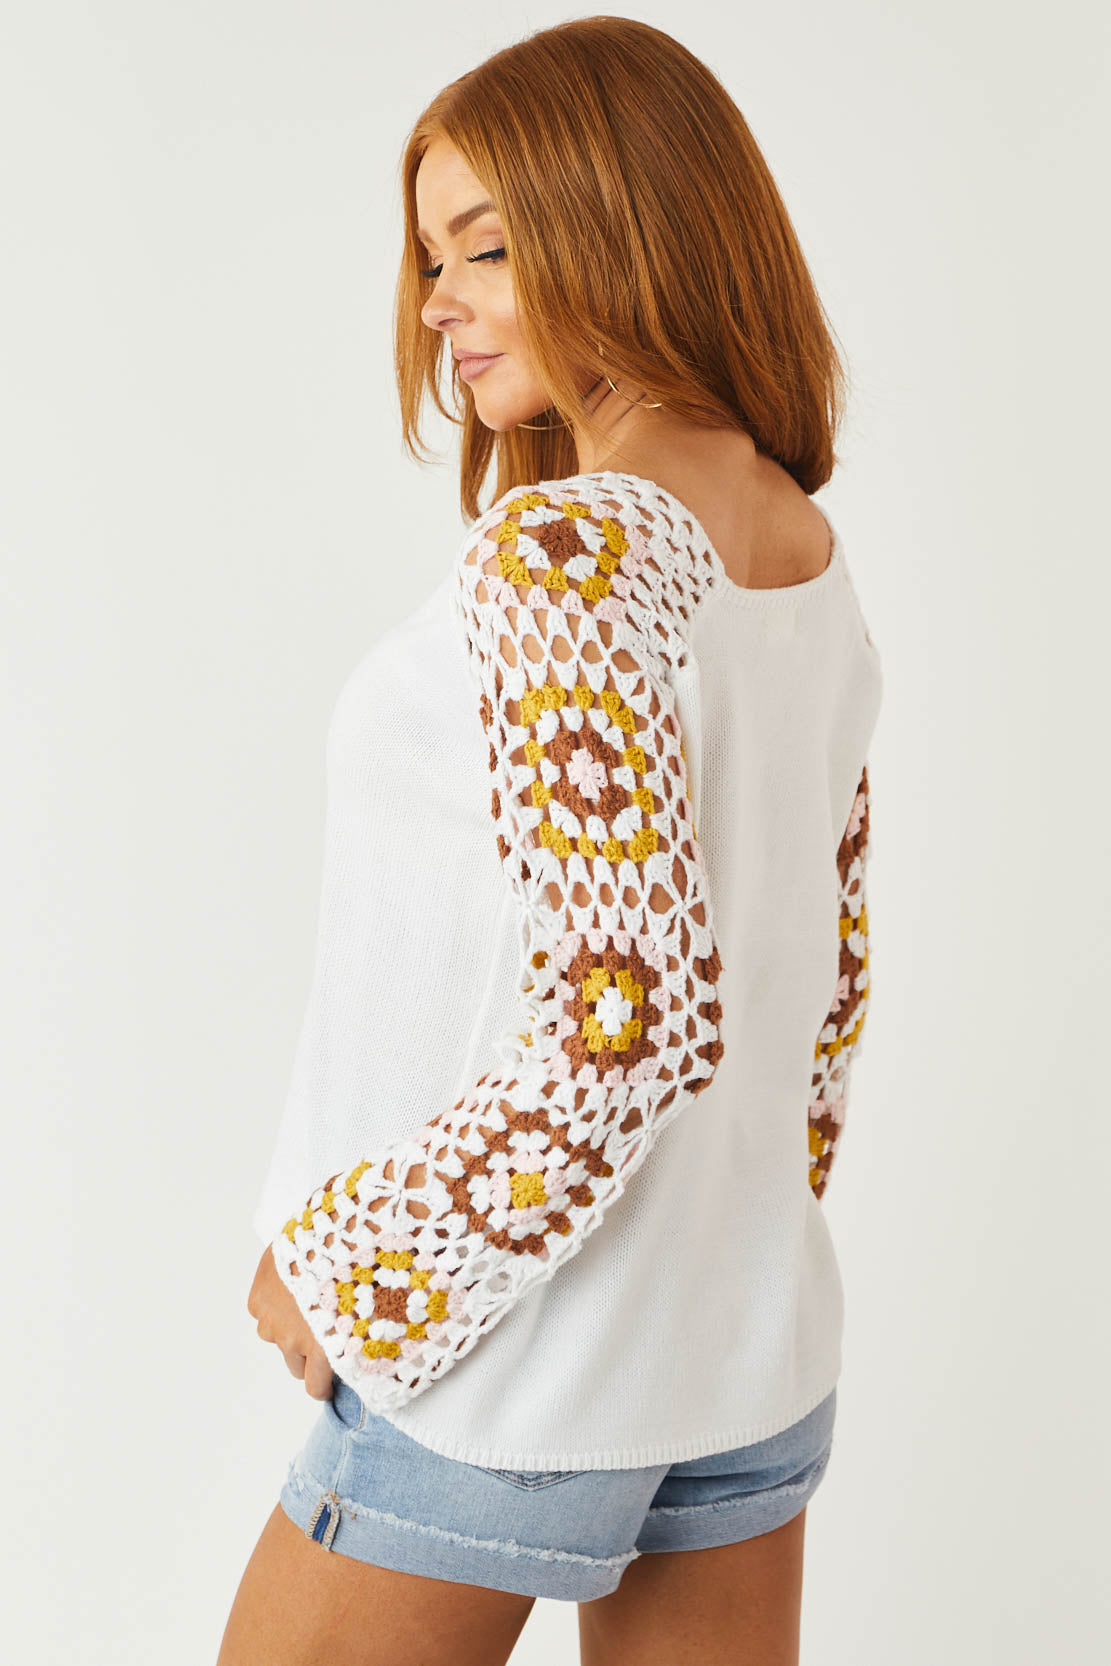 Ivory Knit V Neck Top with Floral Crochet Sleeves